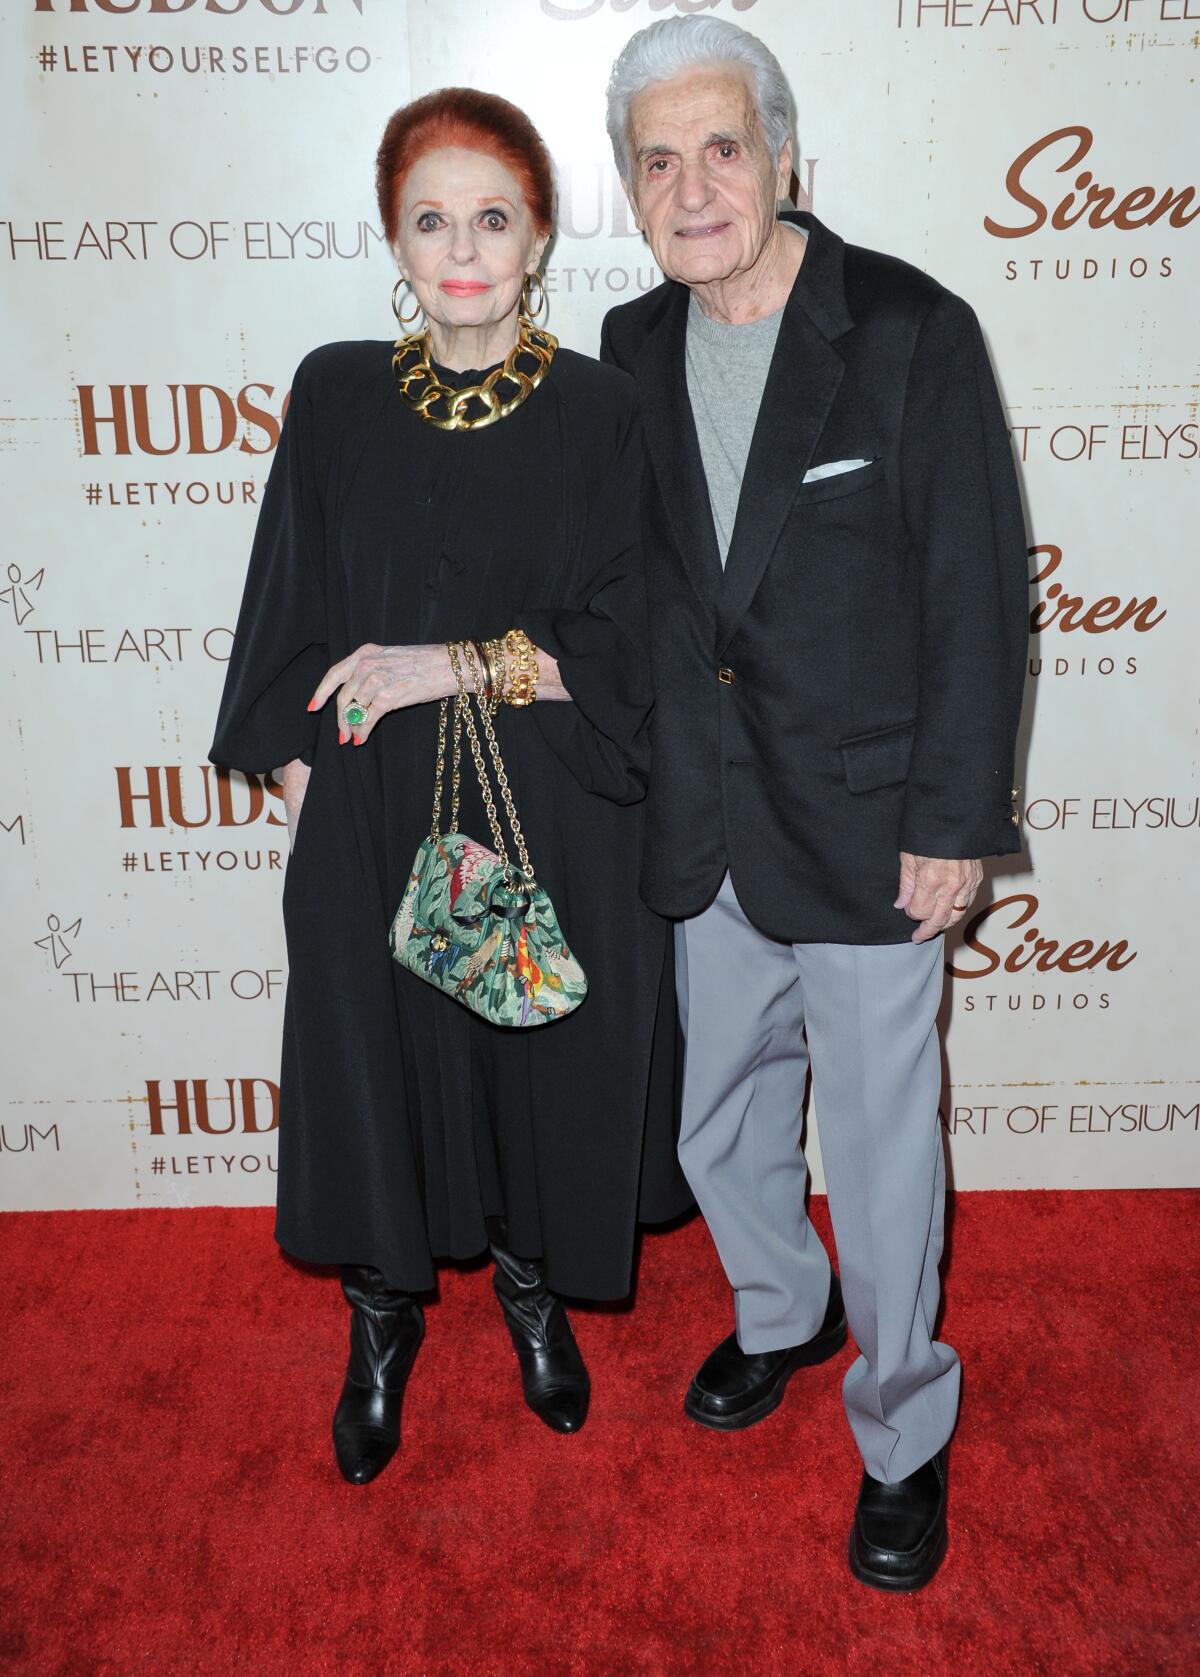 A woman with red hair in a black dress stands next to a man in a black jacket and gray pants on a red carpet.